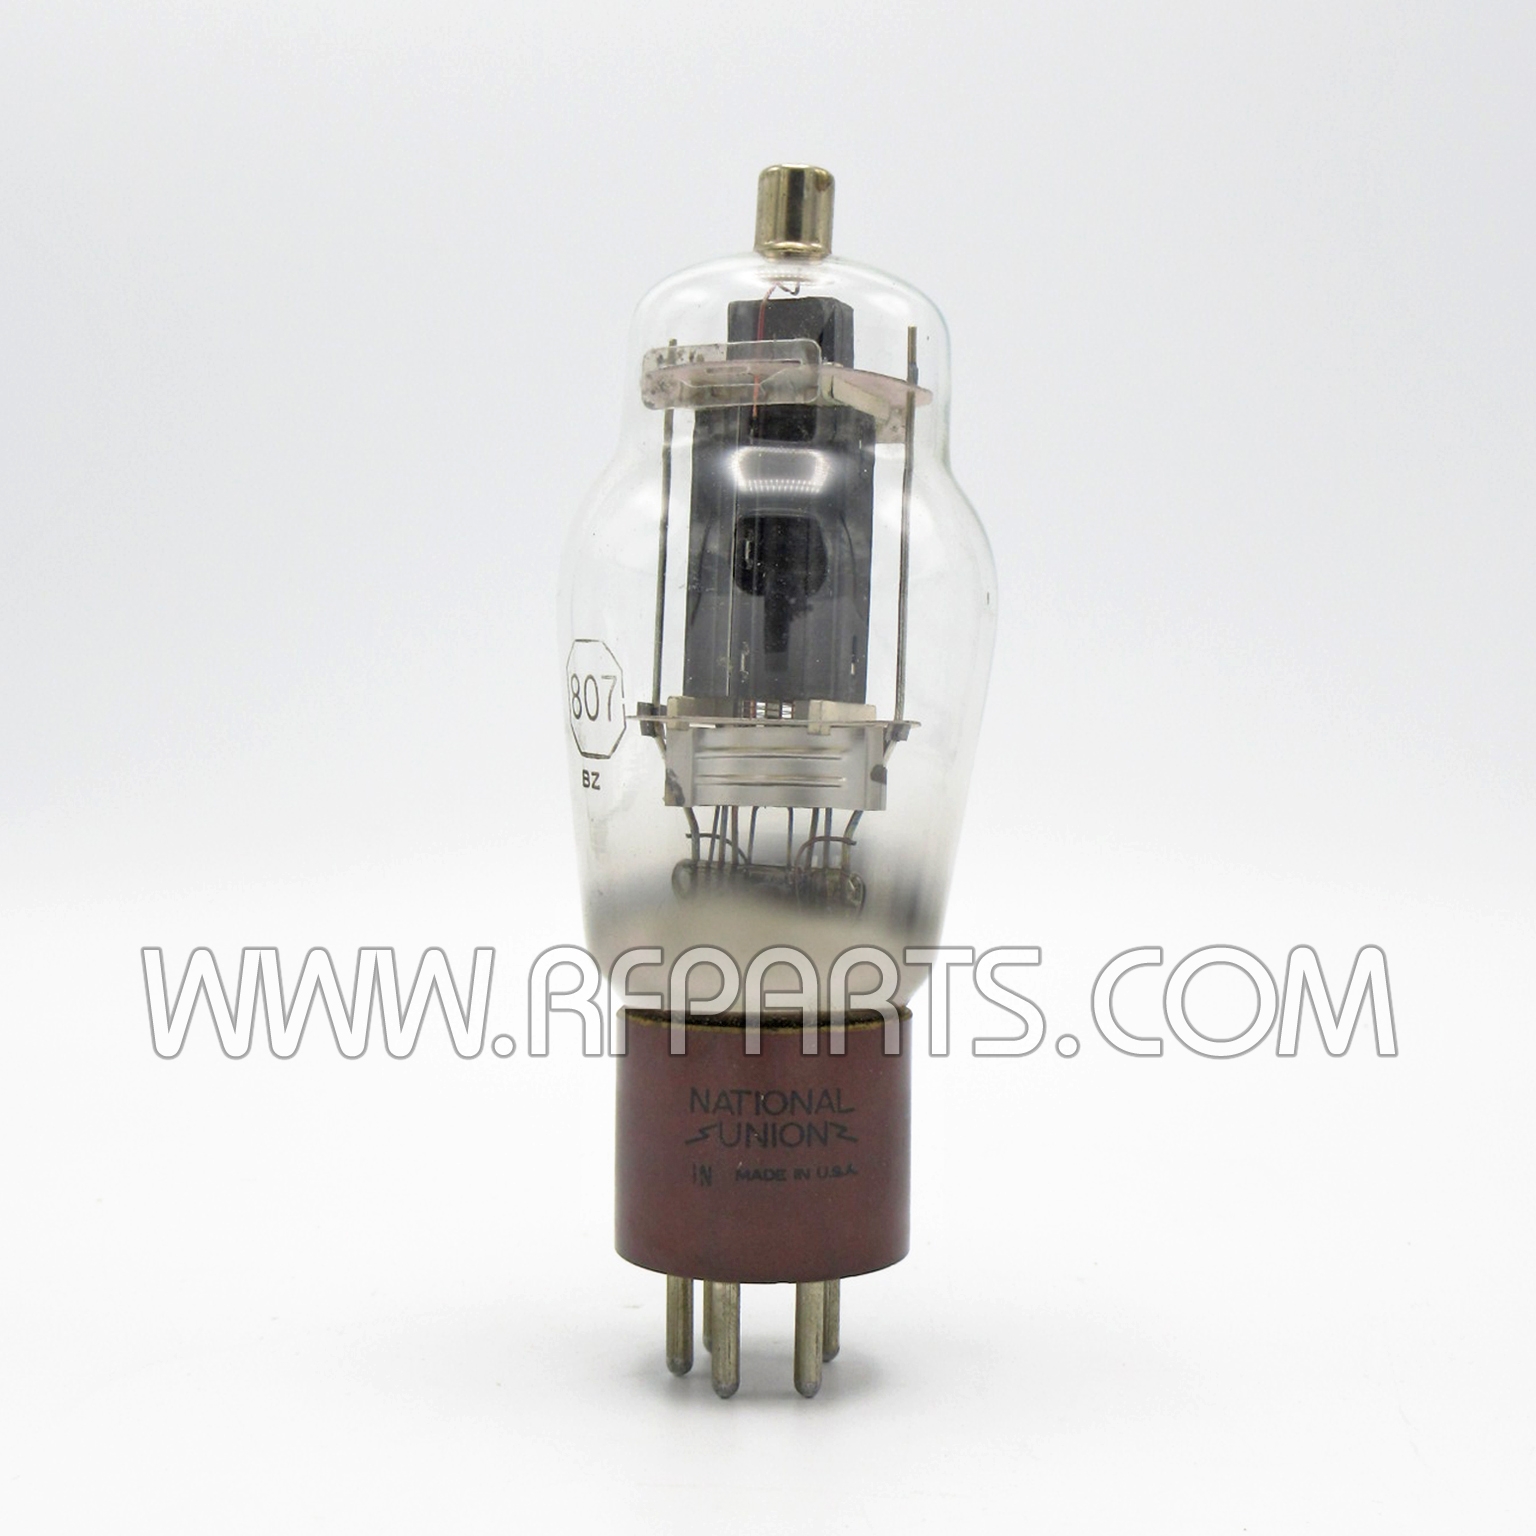 807 National Union Beam Power Amplifier Tube. Limited Quantity Available